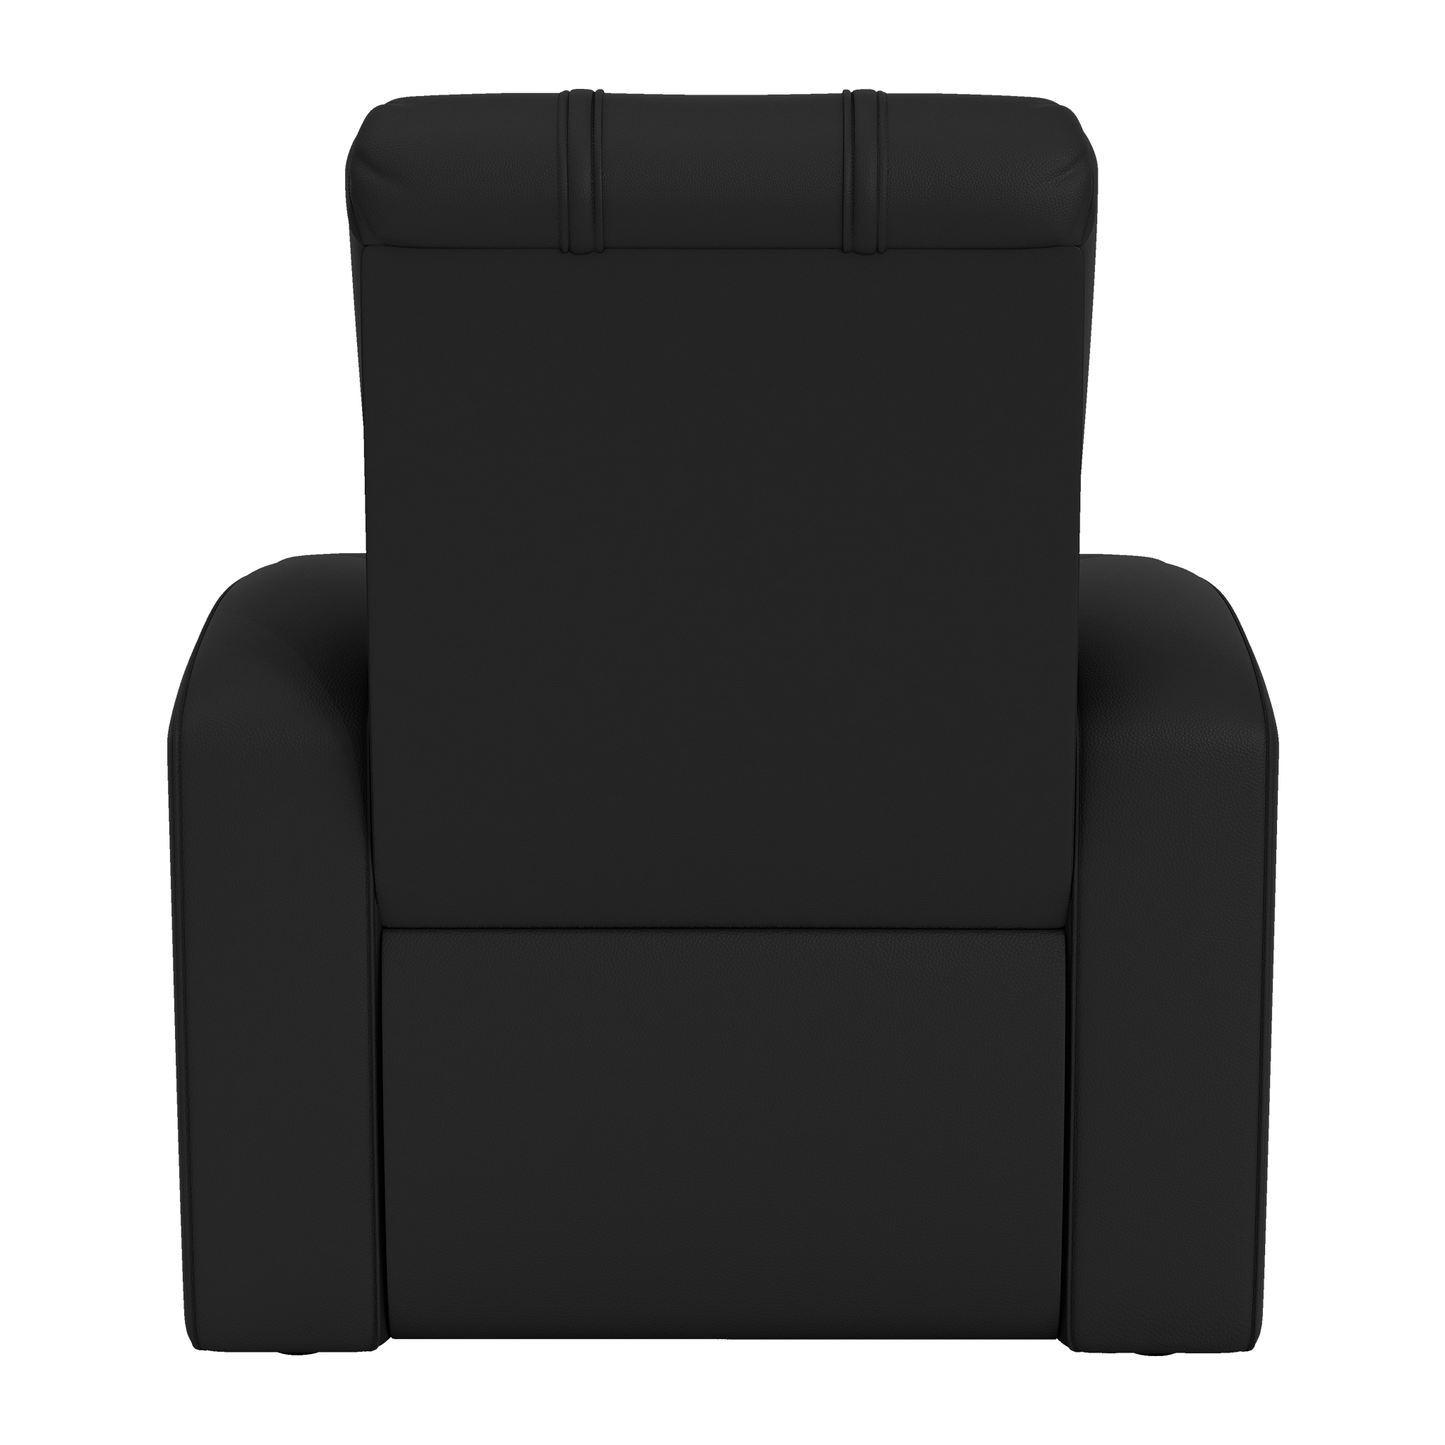 Relax Home Theater Recliner with Washington Wizards Secondary